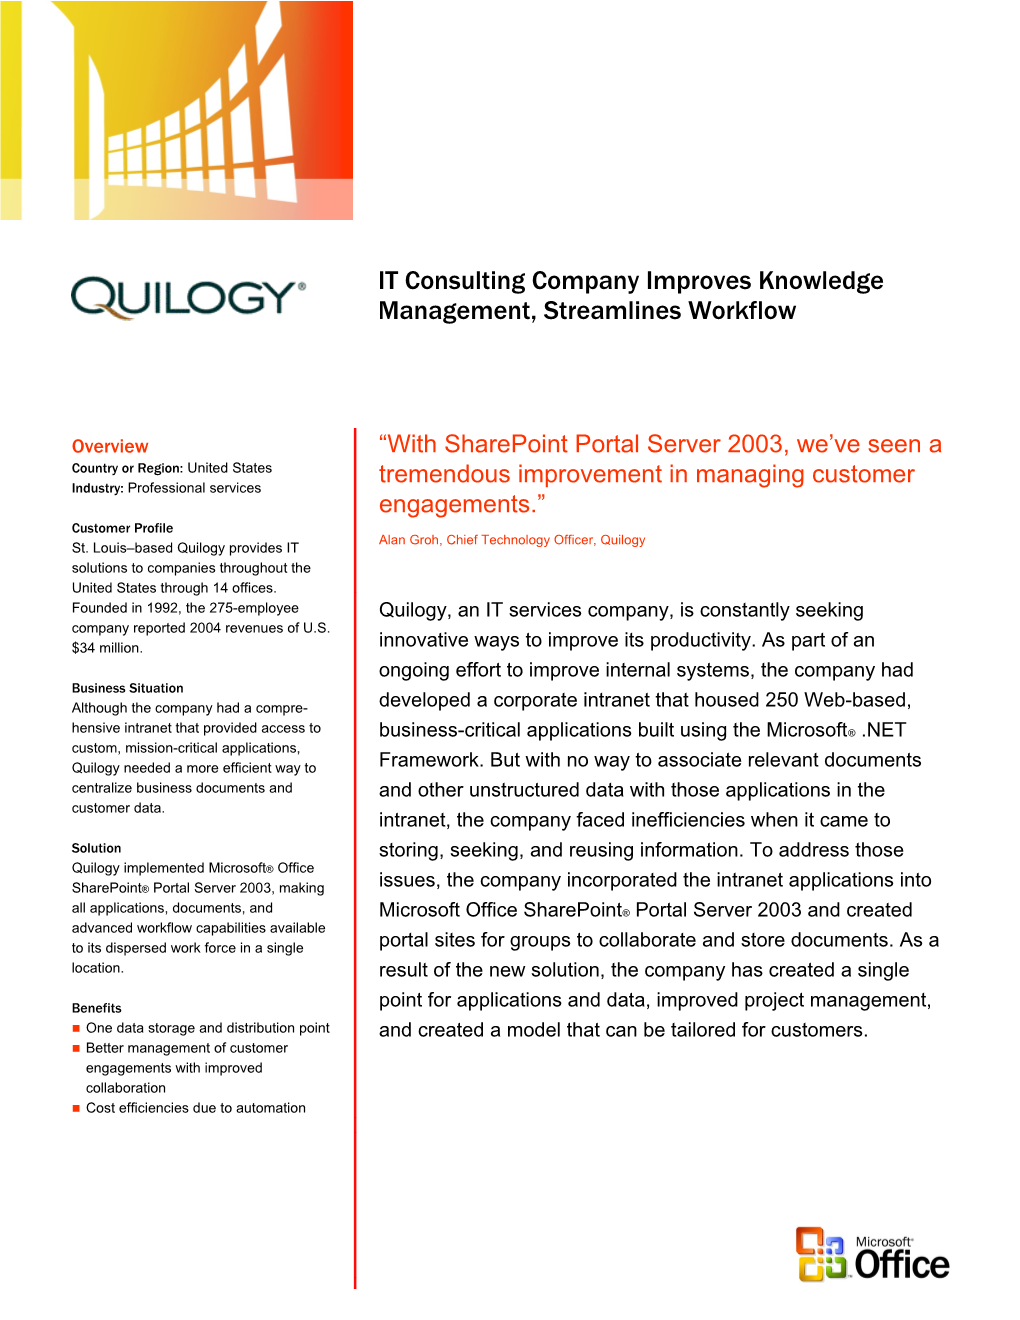 IT Consulting Company Improves Knowledge Management, Streamlines Workflow